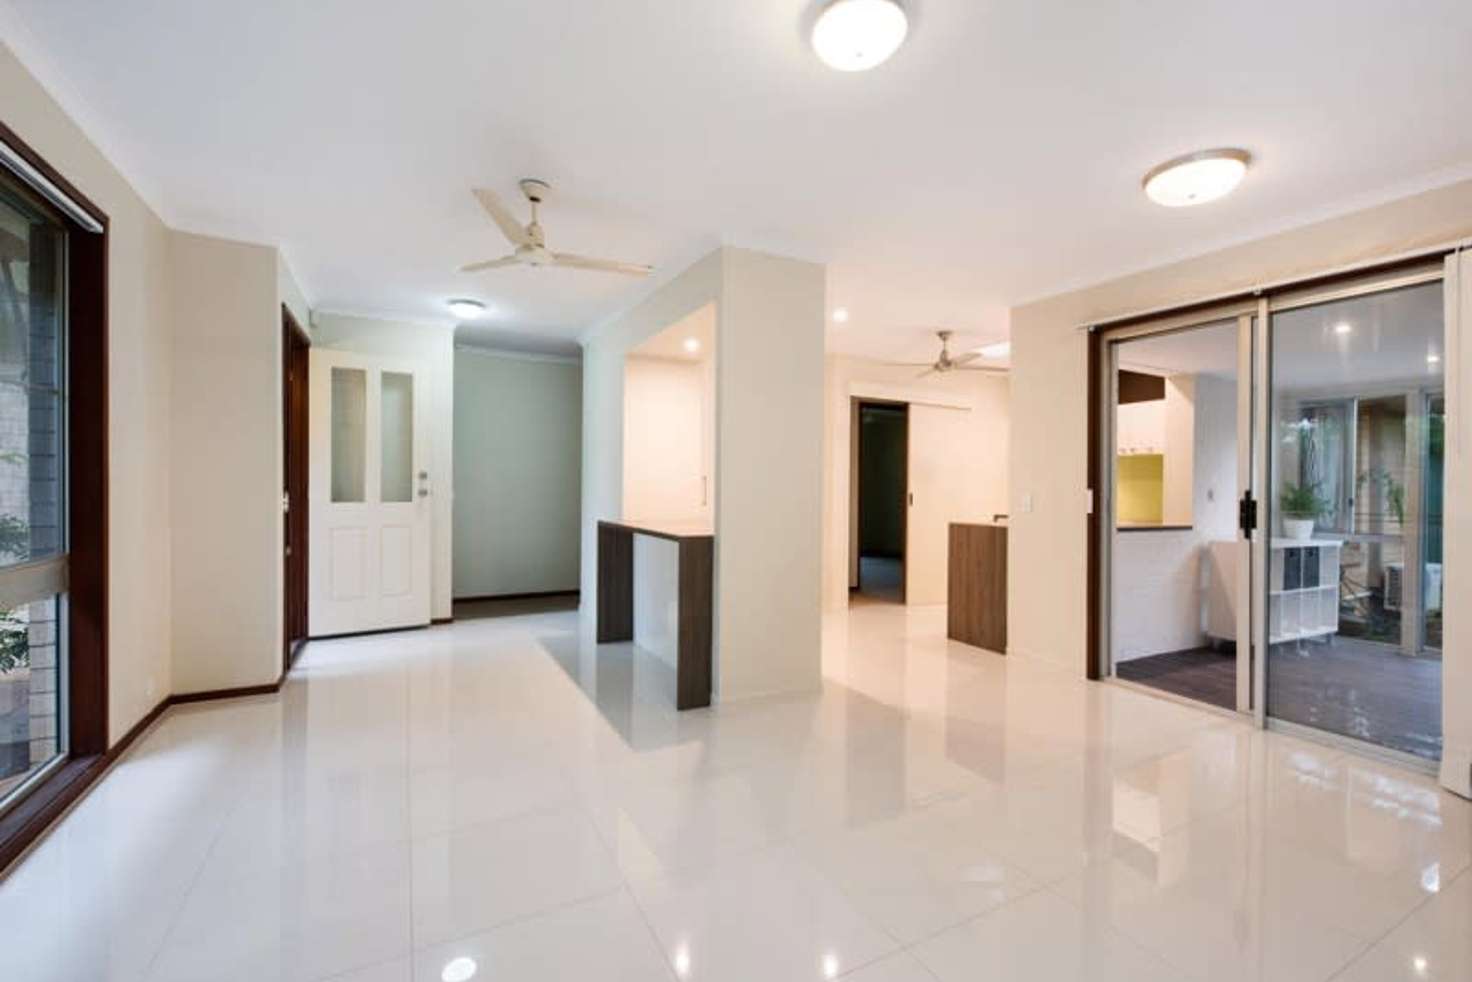 Main view of Homely house listing, 14 Monks Crescent, Buderim QLD 4556